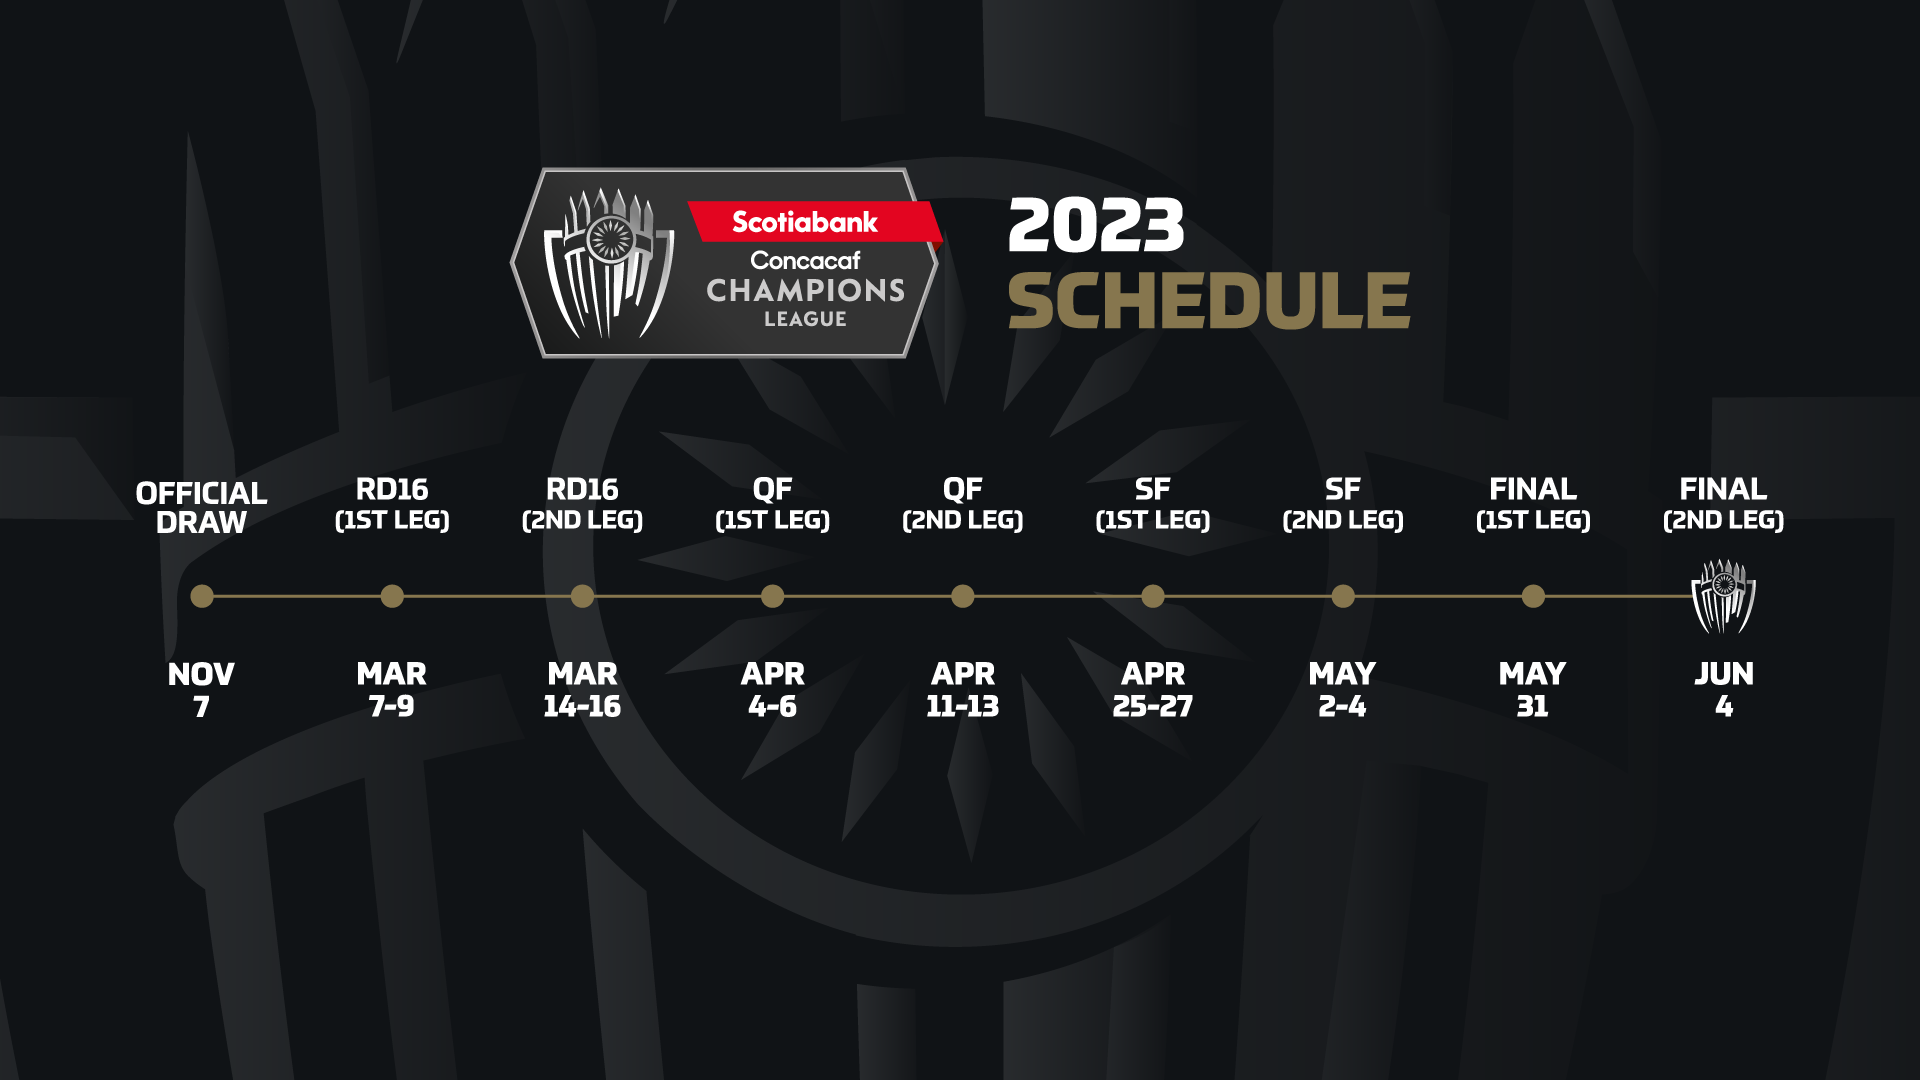 Concacaf announces details for 2023 Scotiabank Concacaf Champions